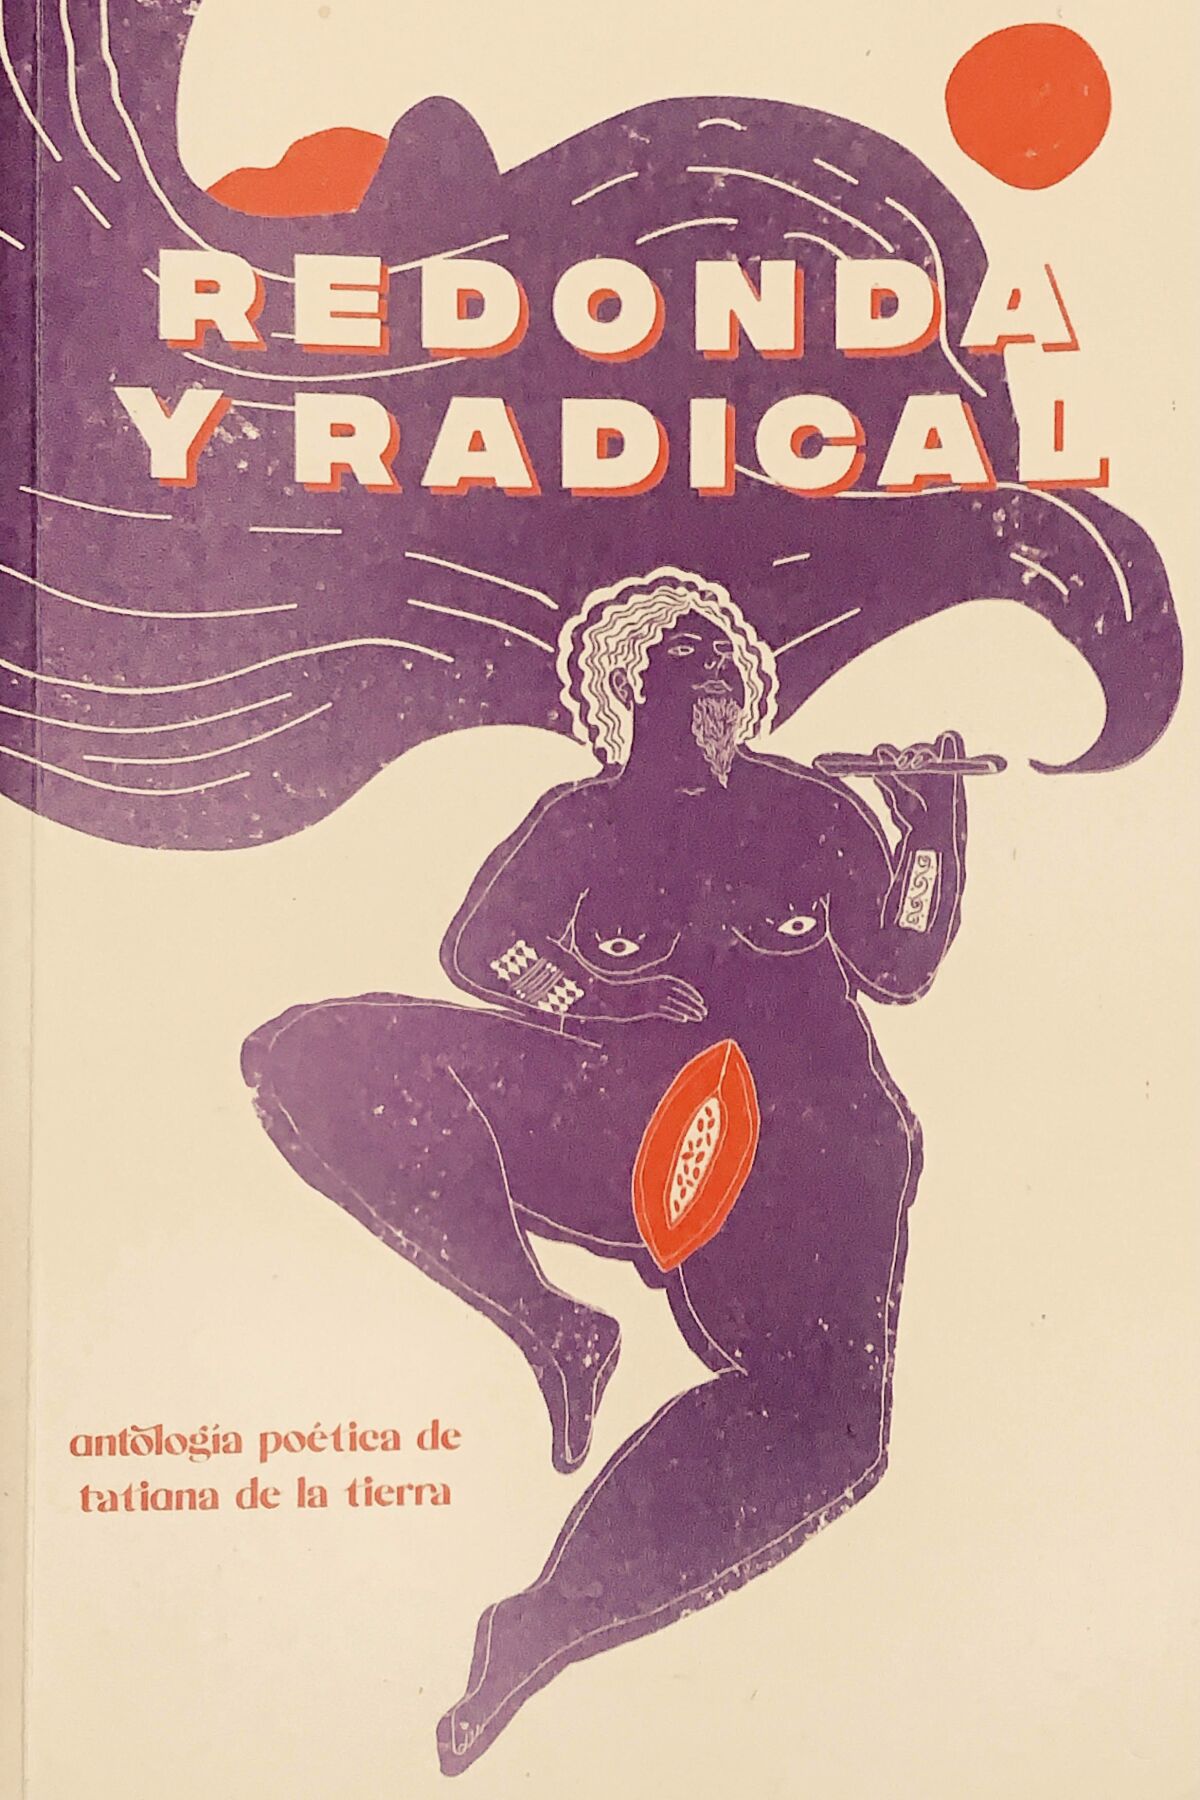 The cover of "Redonda y Radical."